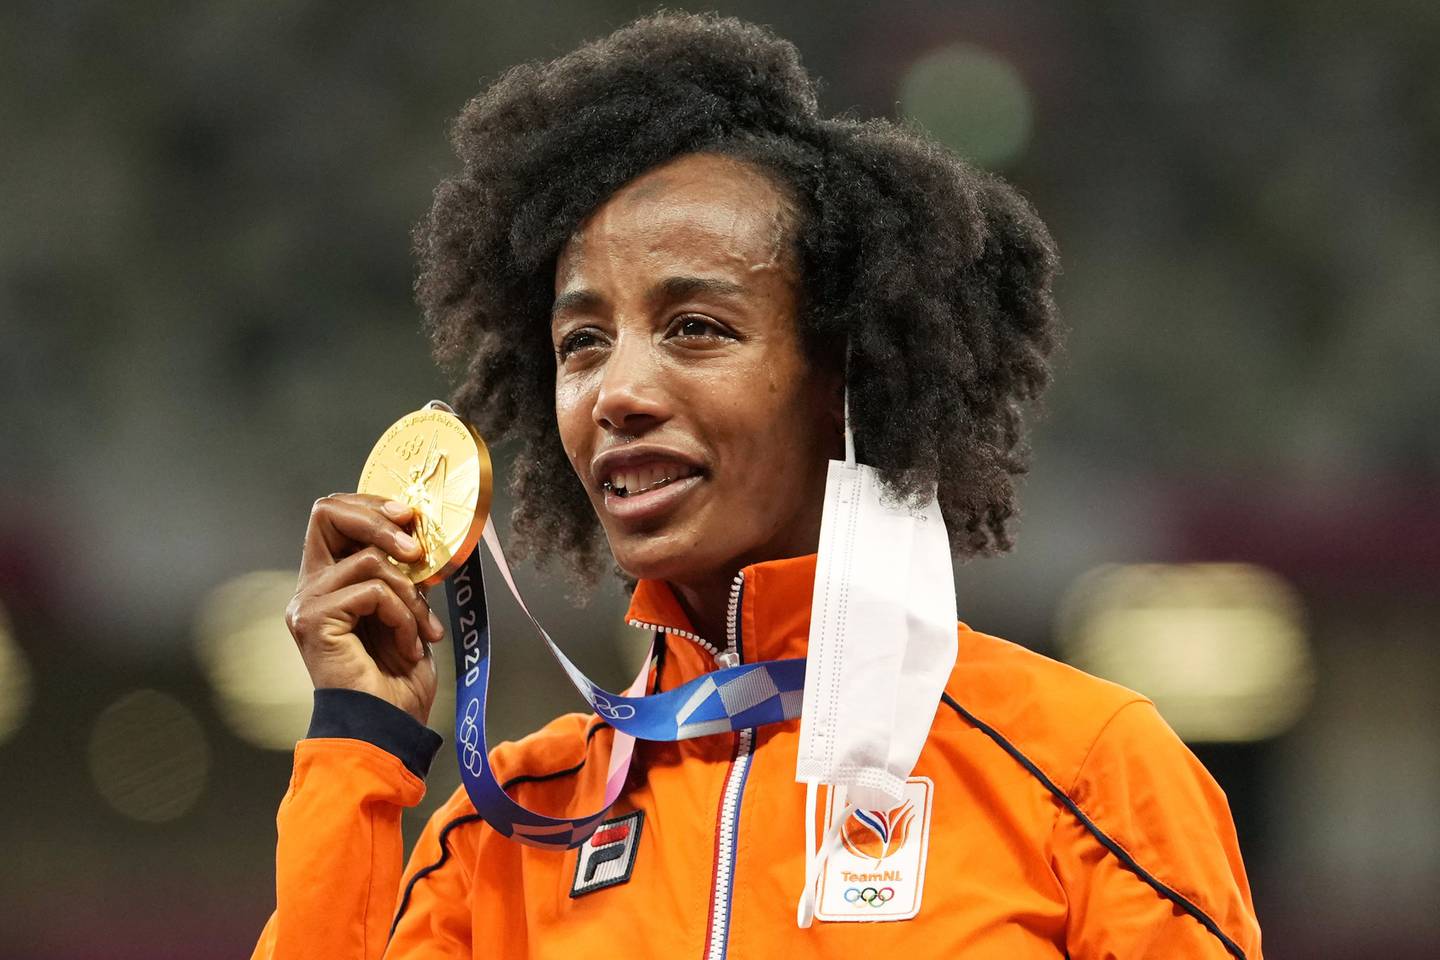 Hassan was flagbearer at the Tokyo Olympics' closing ceremony for the Netherlands, the country where she arrived 13 years ago as a refugee. AP Photo